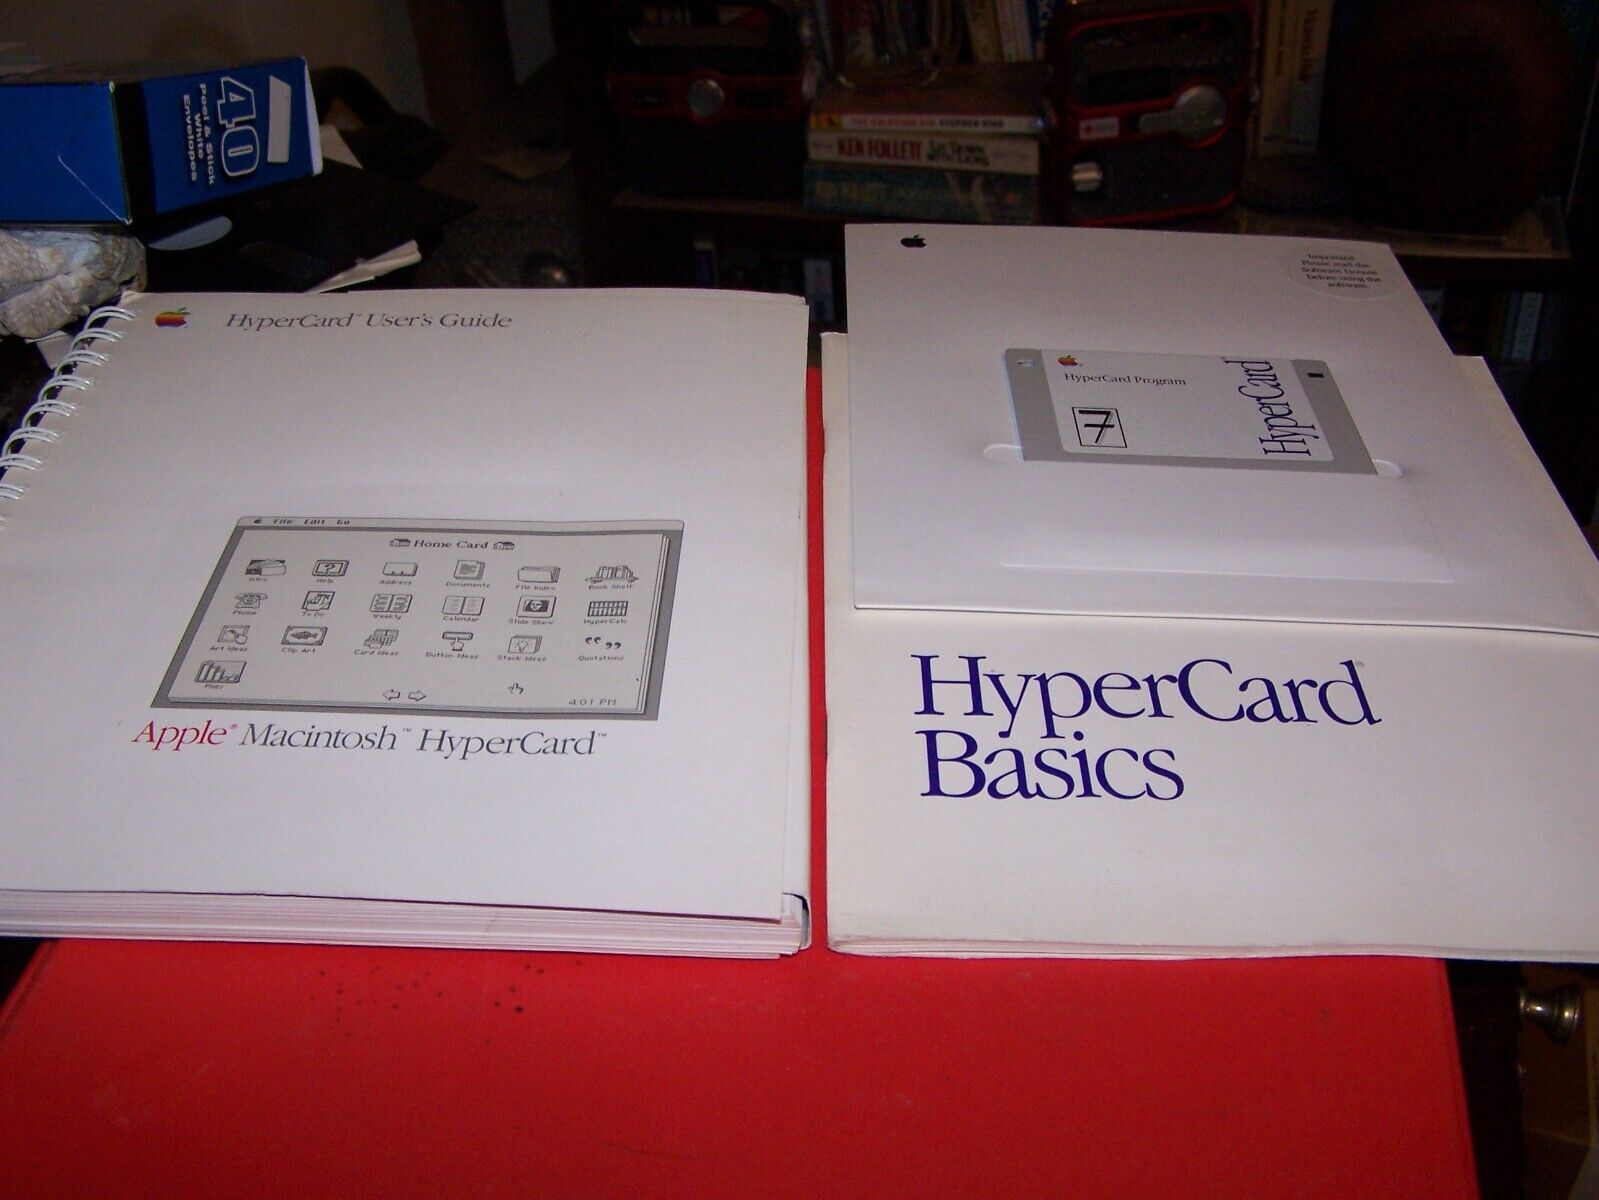 Apple Macintosh Hypercard 2.1 on 1.44MB Disk with Basics and User's Guide